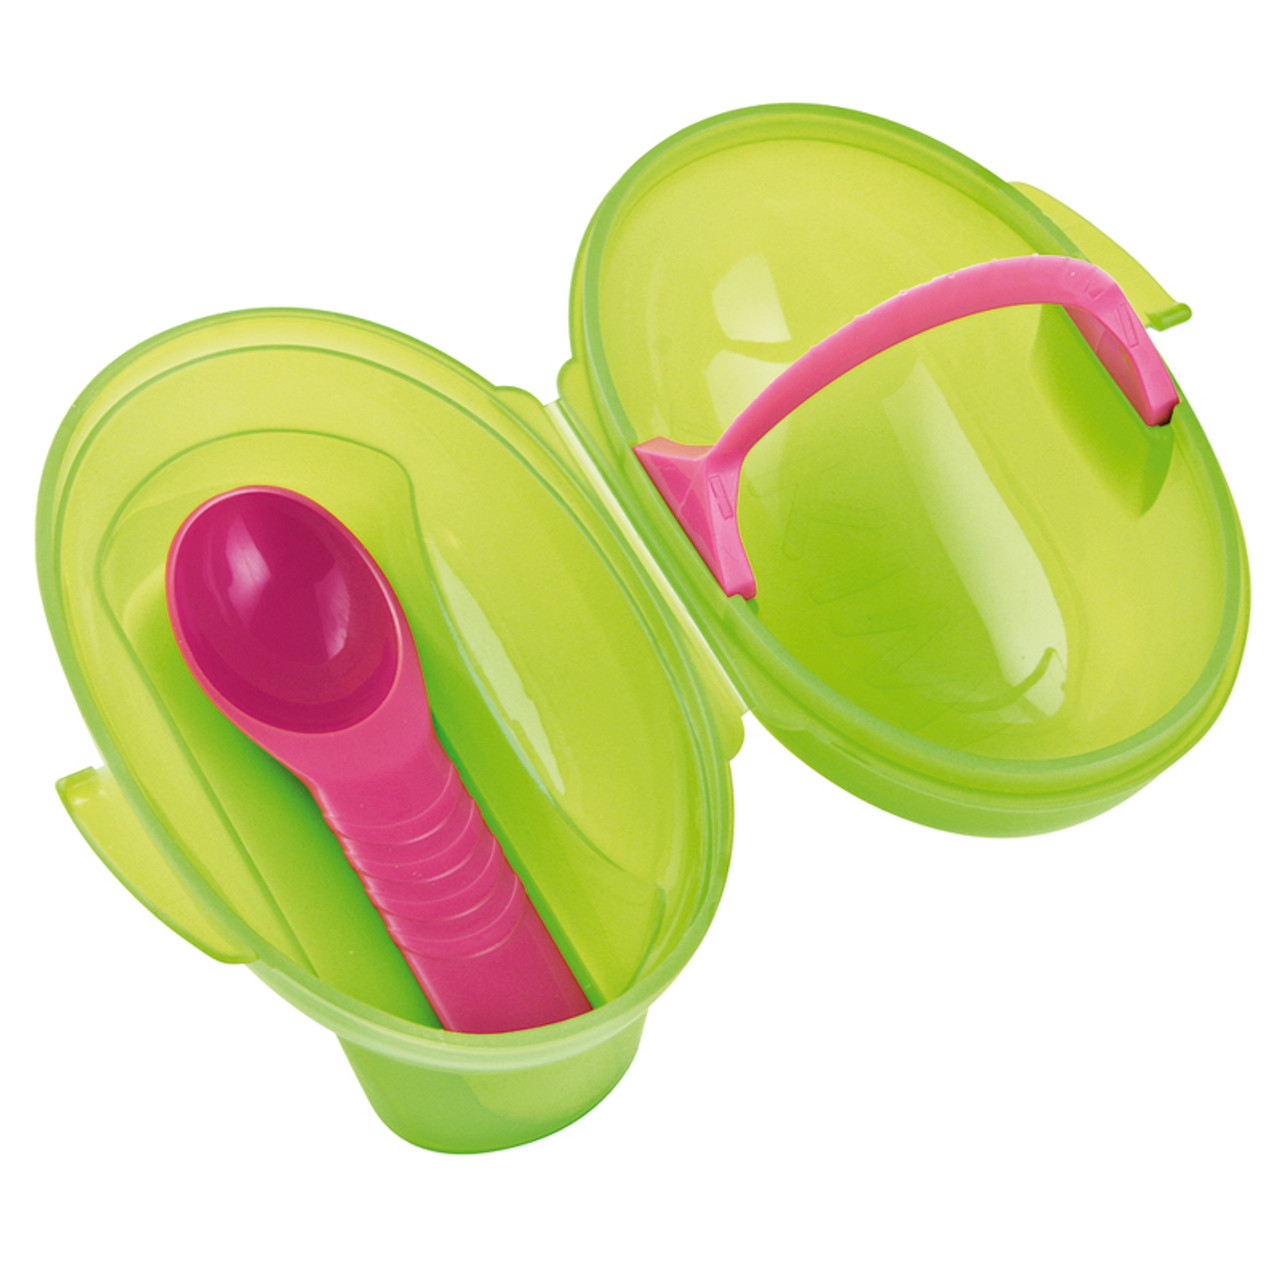 Kiwi Tupperware - Too cute and great storage for you or your mini